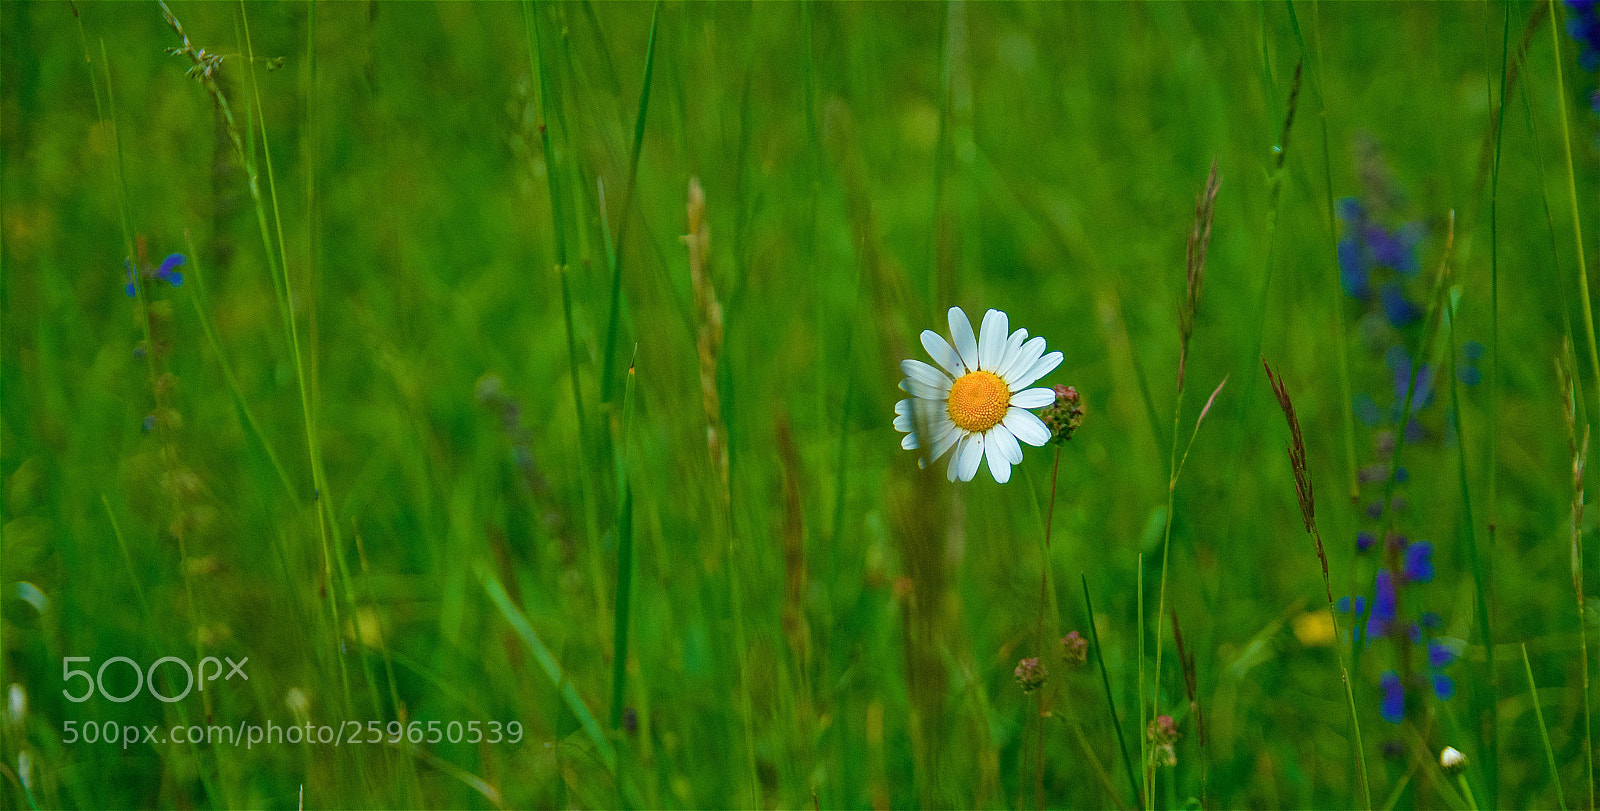 Pentax K-3 II sample photo. Grass and flower photography